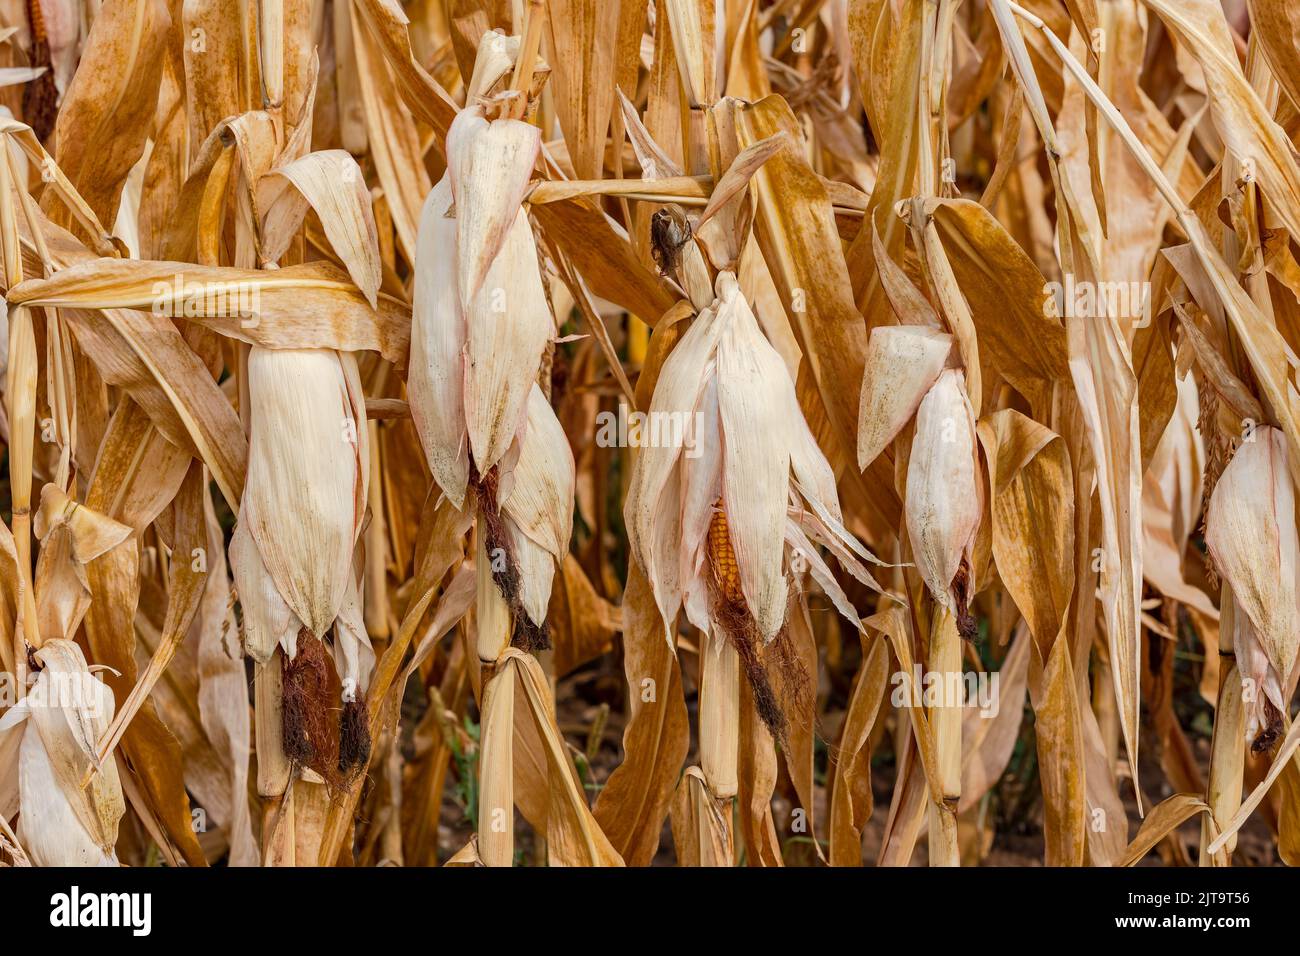 A corn field with ripe and withered corn after heat wave in climate crisis Stock Photo